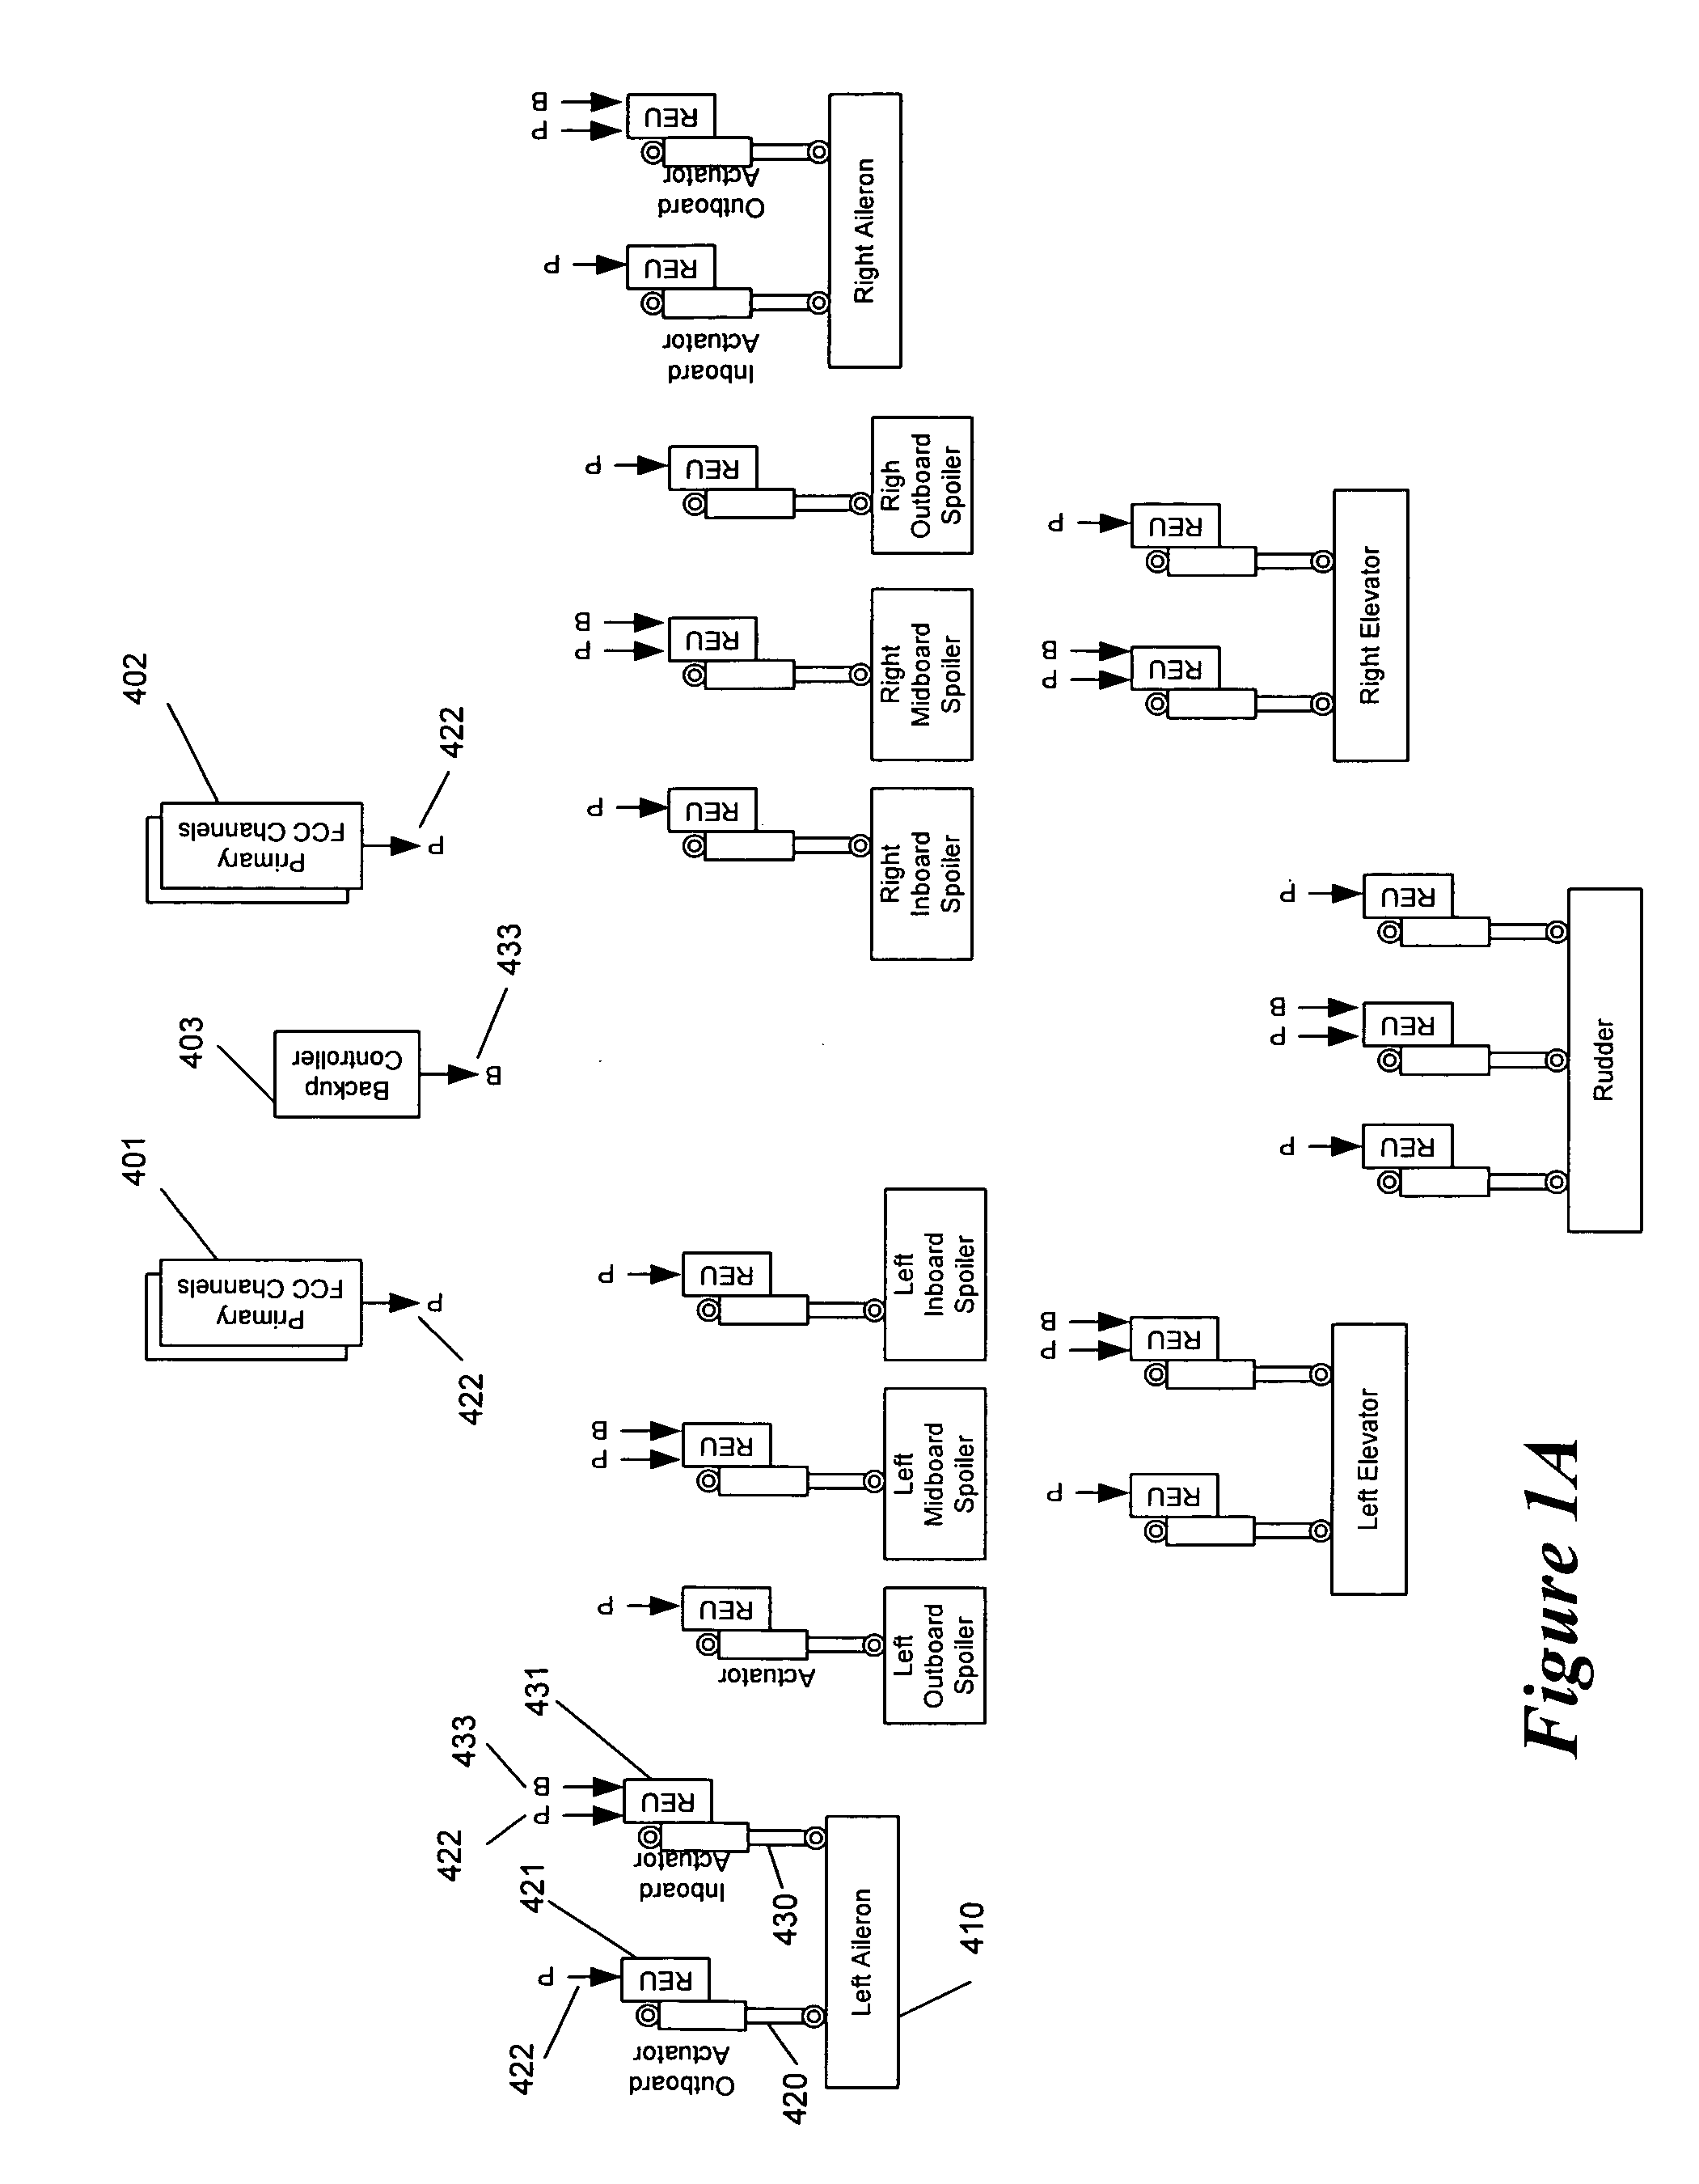 Apparatus and method for backup control in a distributed flight control system